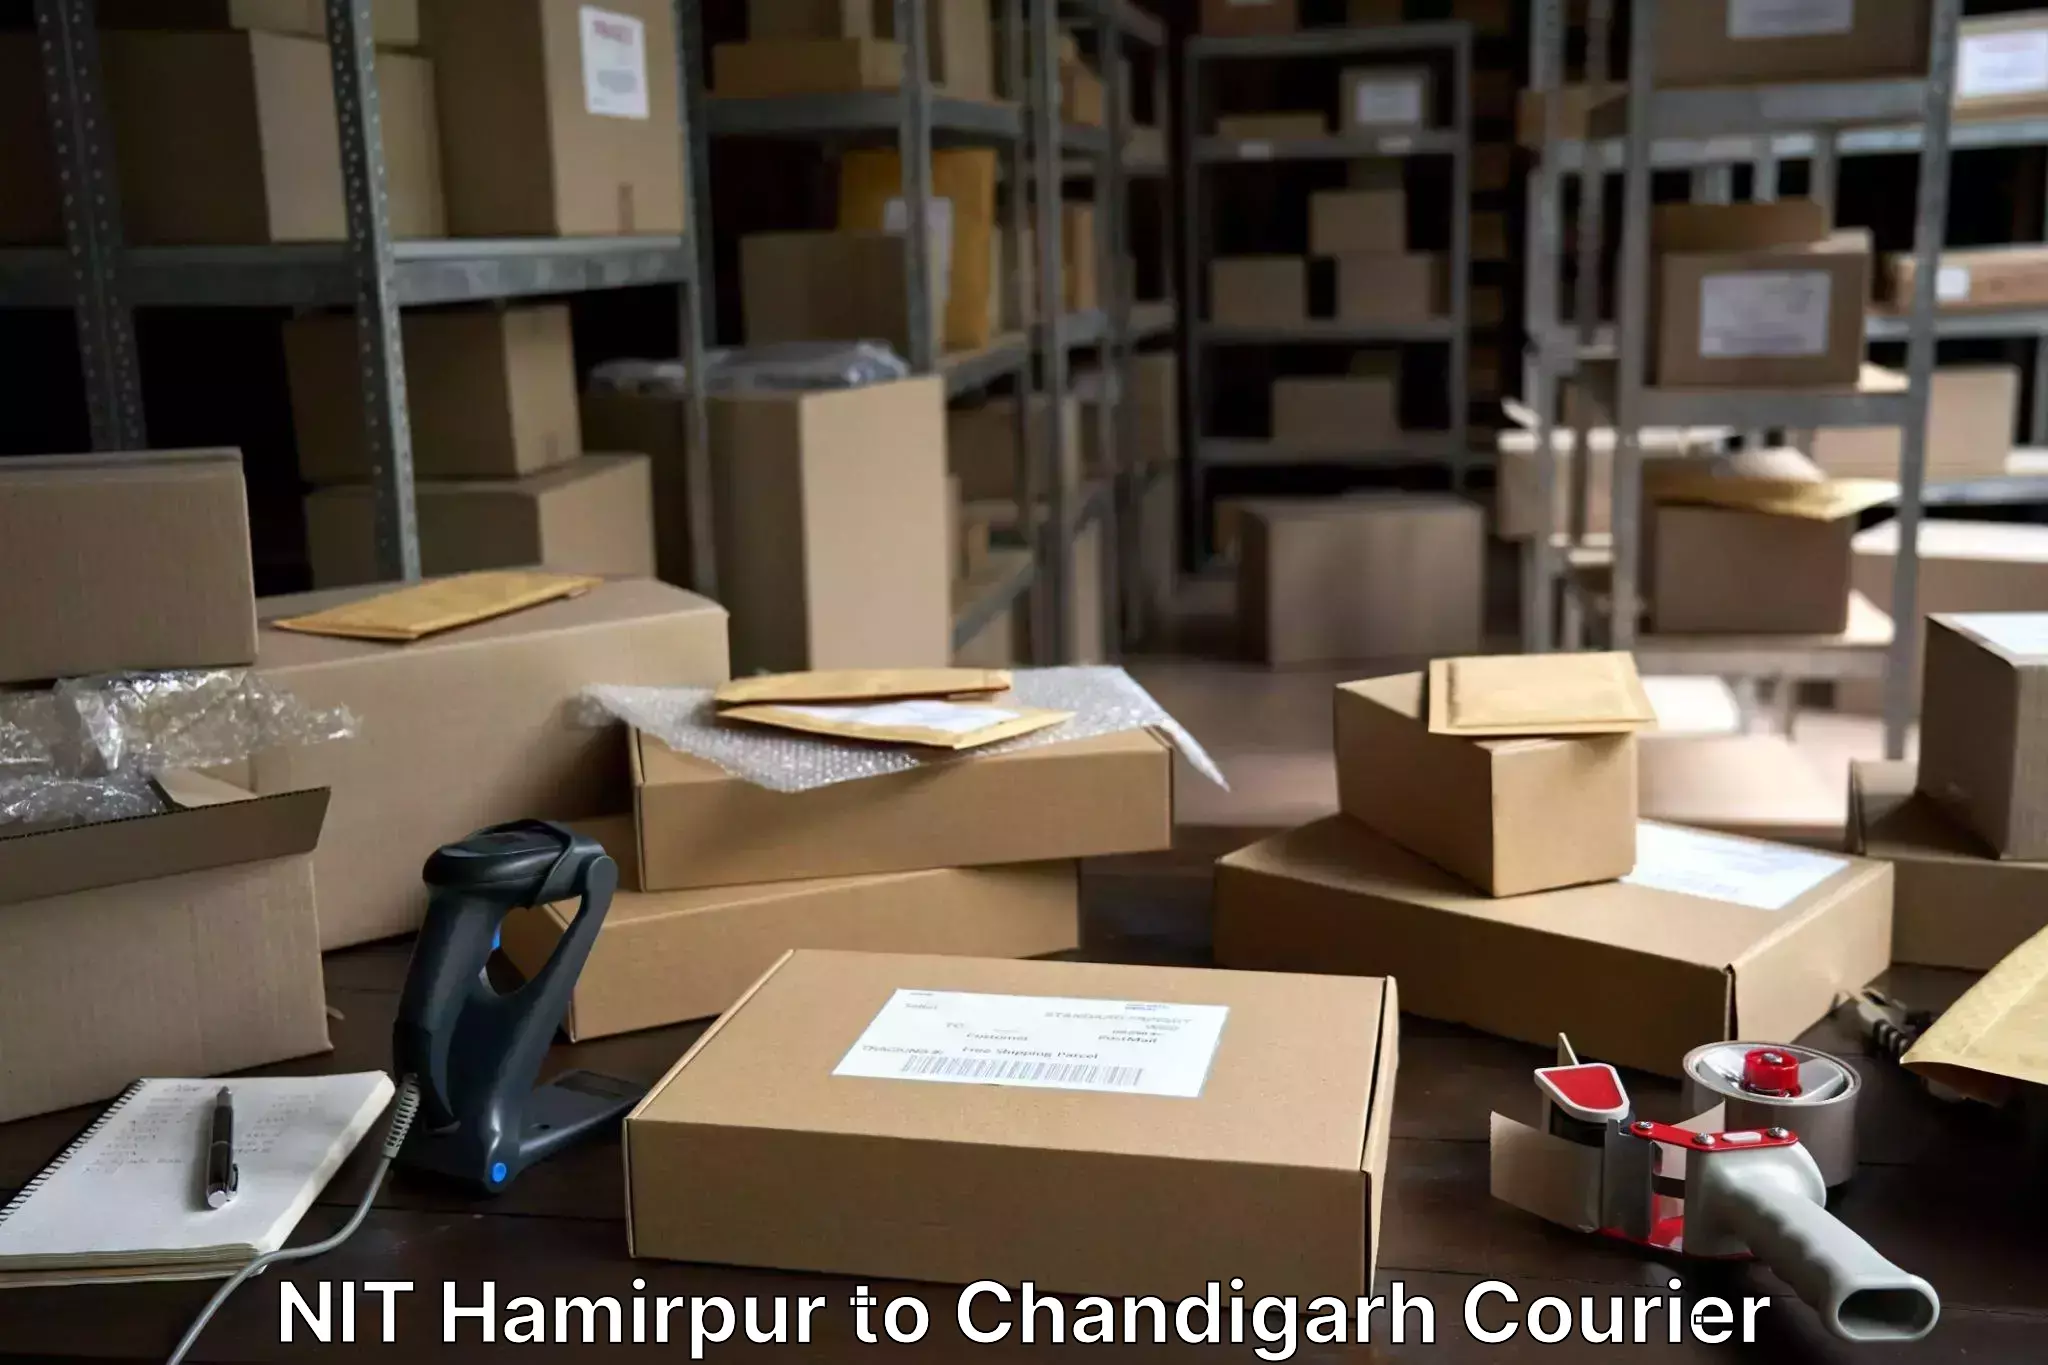 Luggage transport consulting NIT Hamirpur to Chandigarh